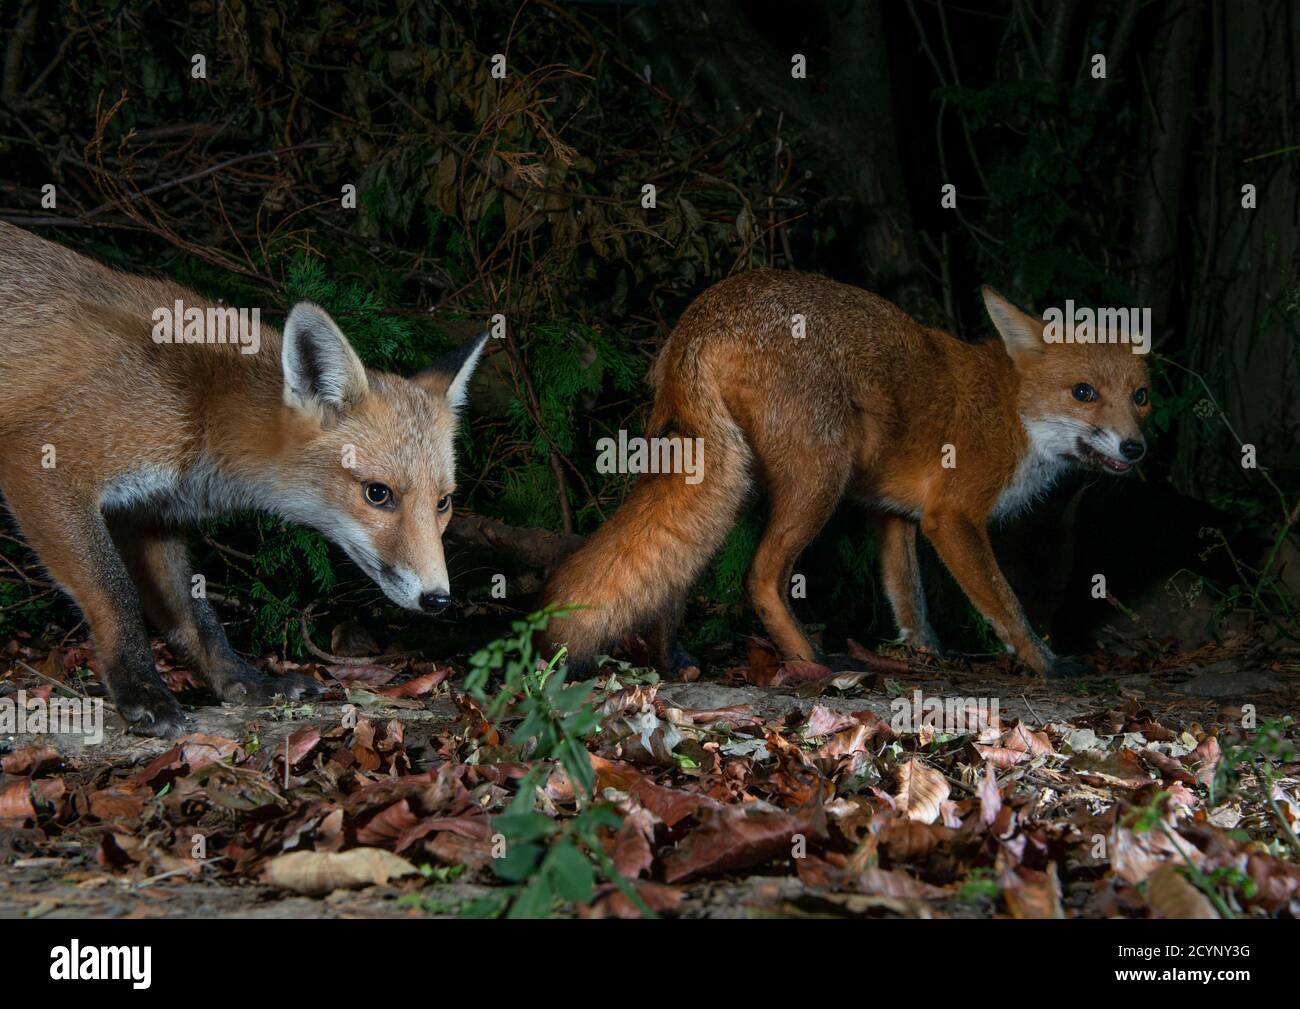 Two foxes at night one submissive and one with teeth barred challenging the other Stock Photo